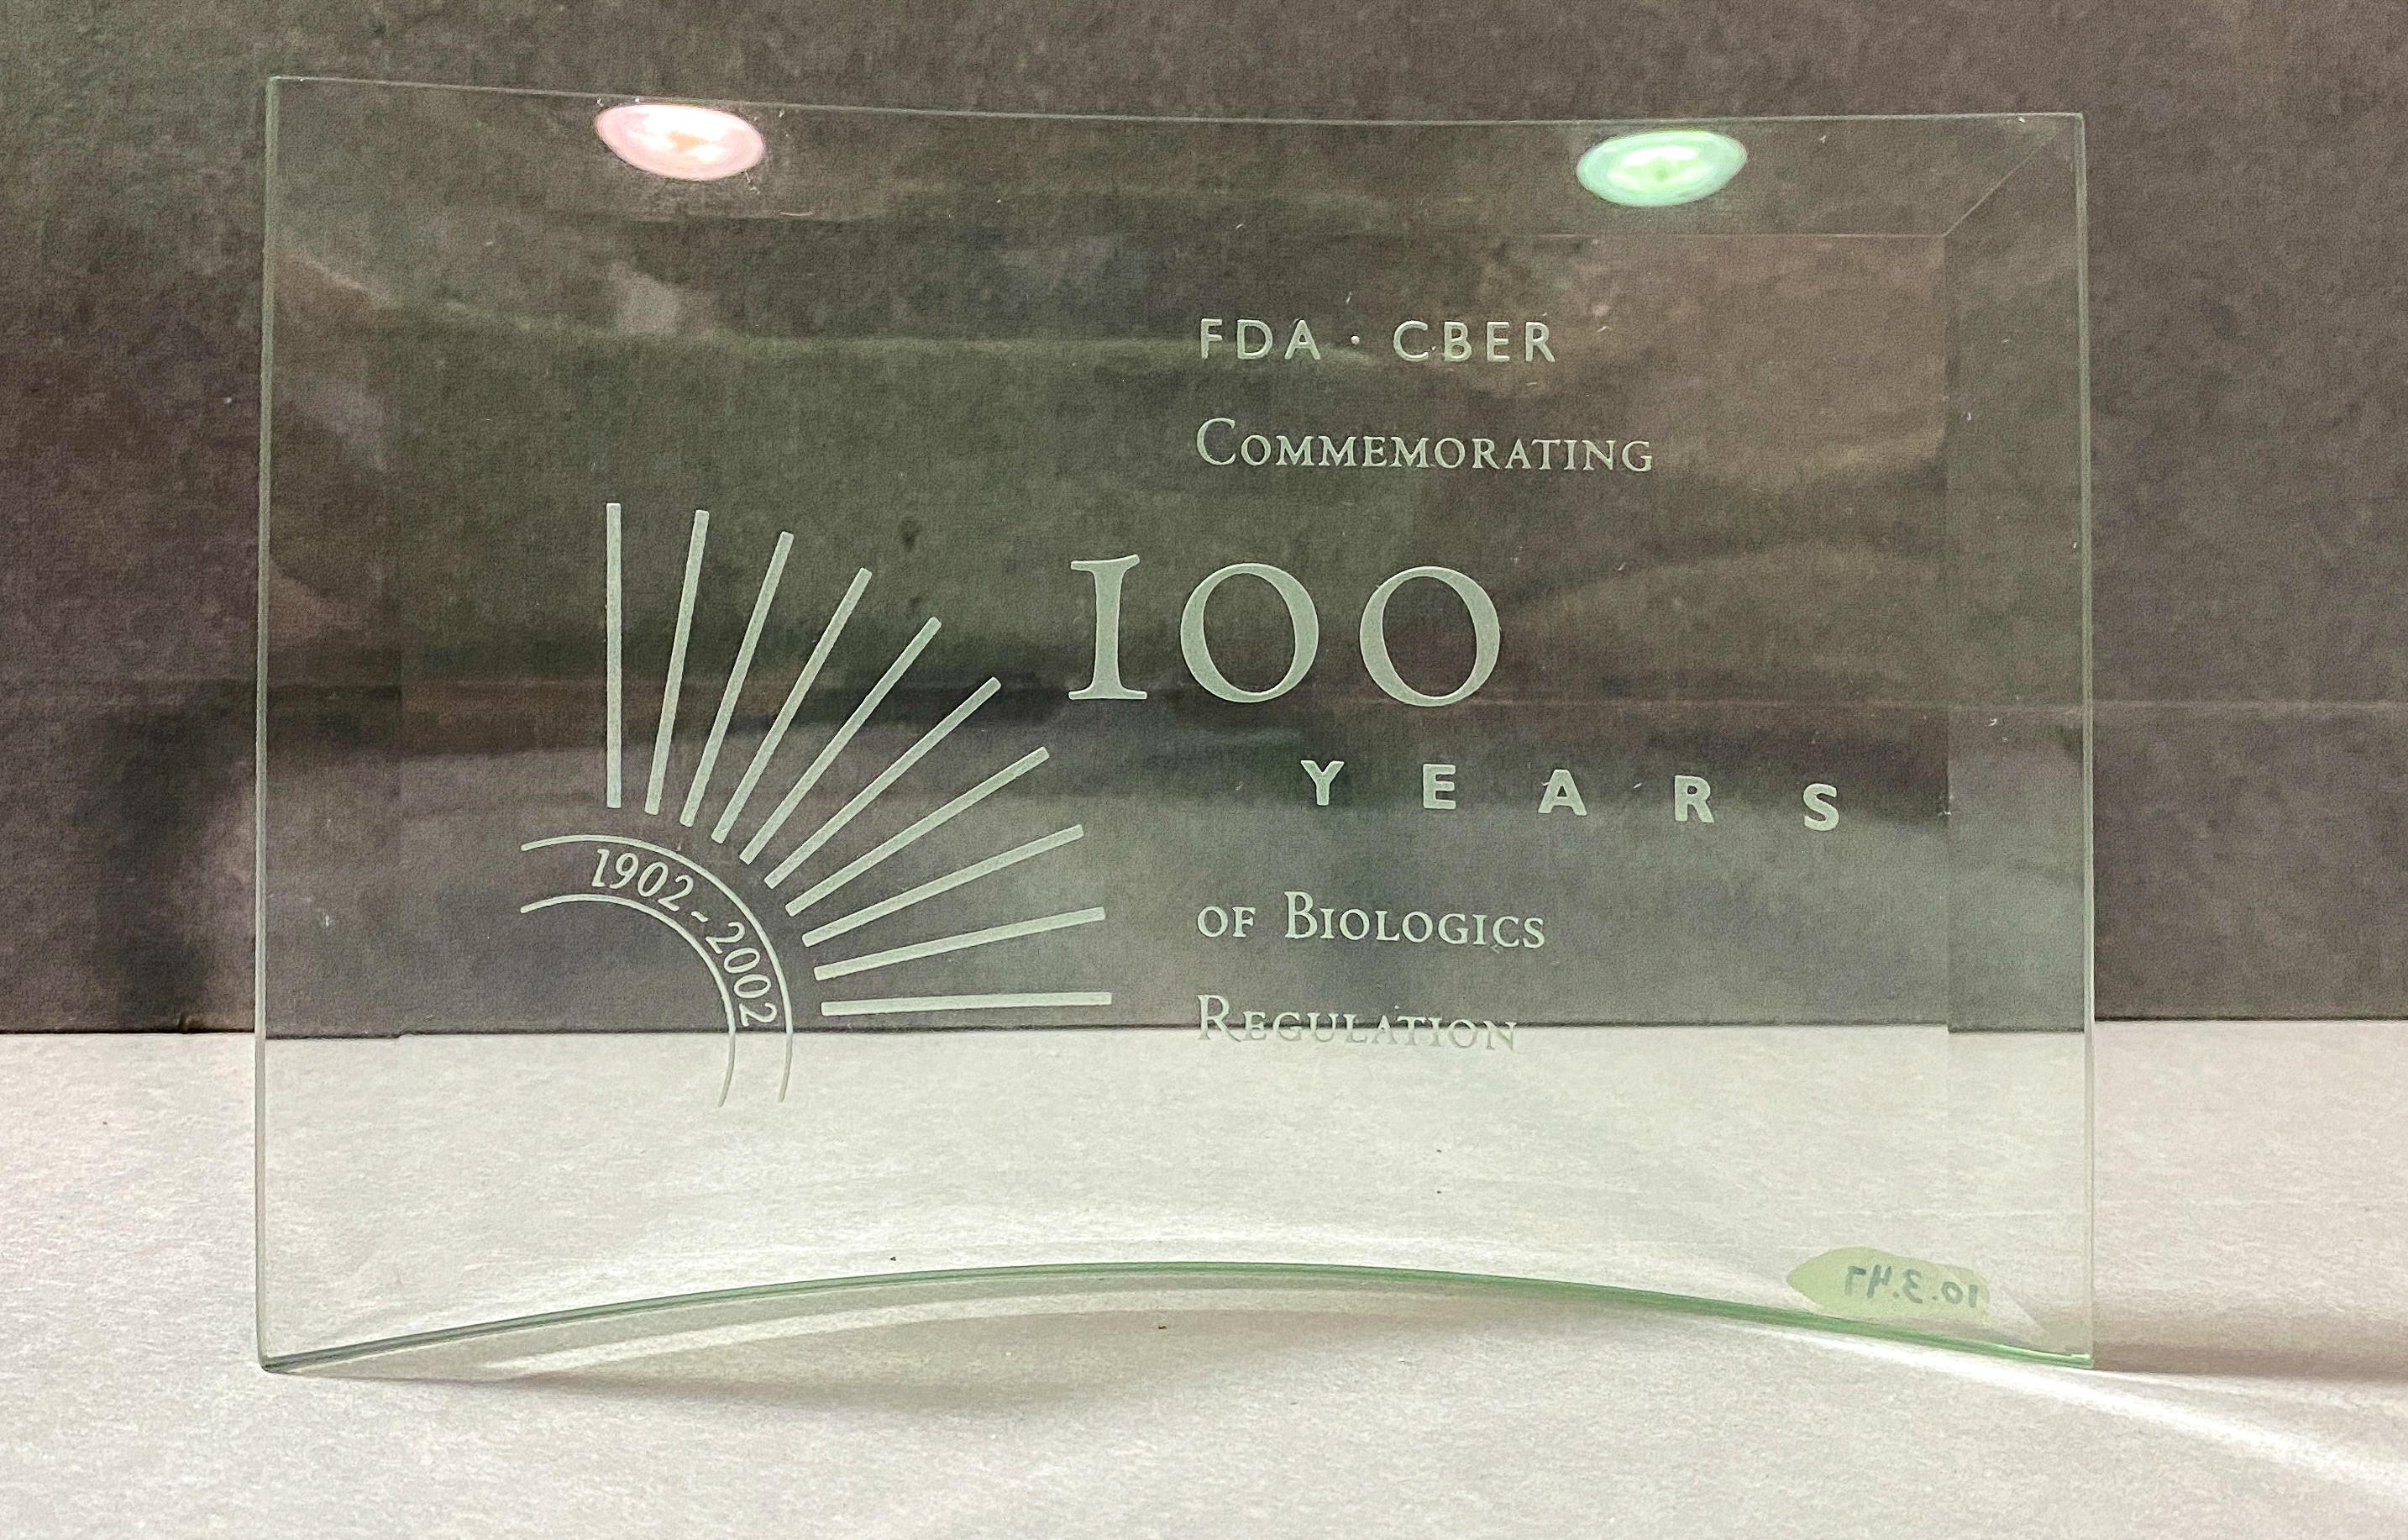 a photo of a glass rectangular award celebrating the 100th anniversary of the Center for Biologics Evaluation and Research